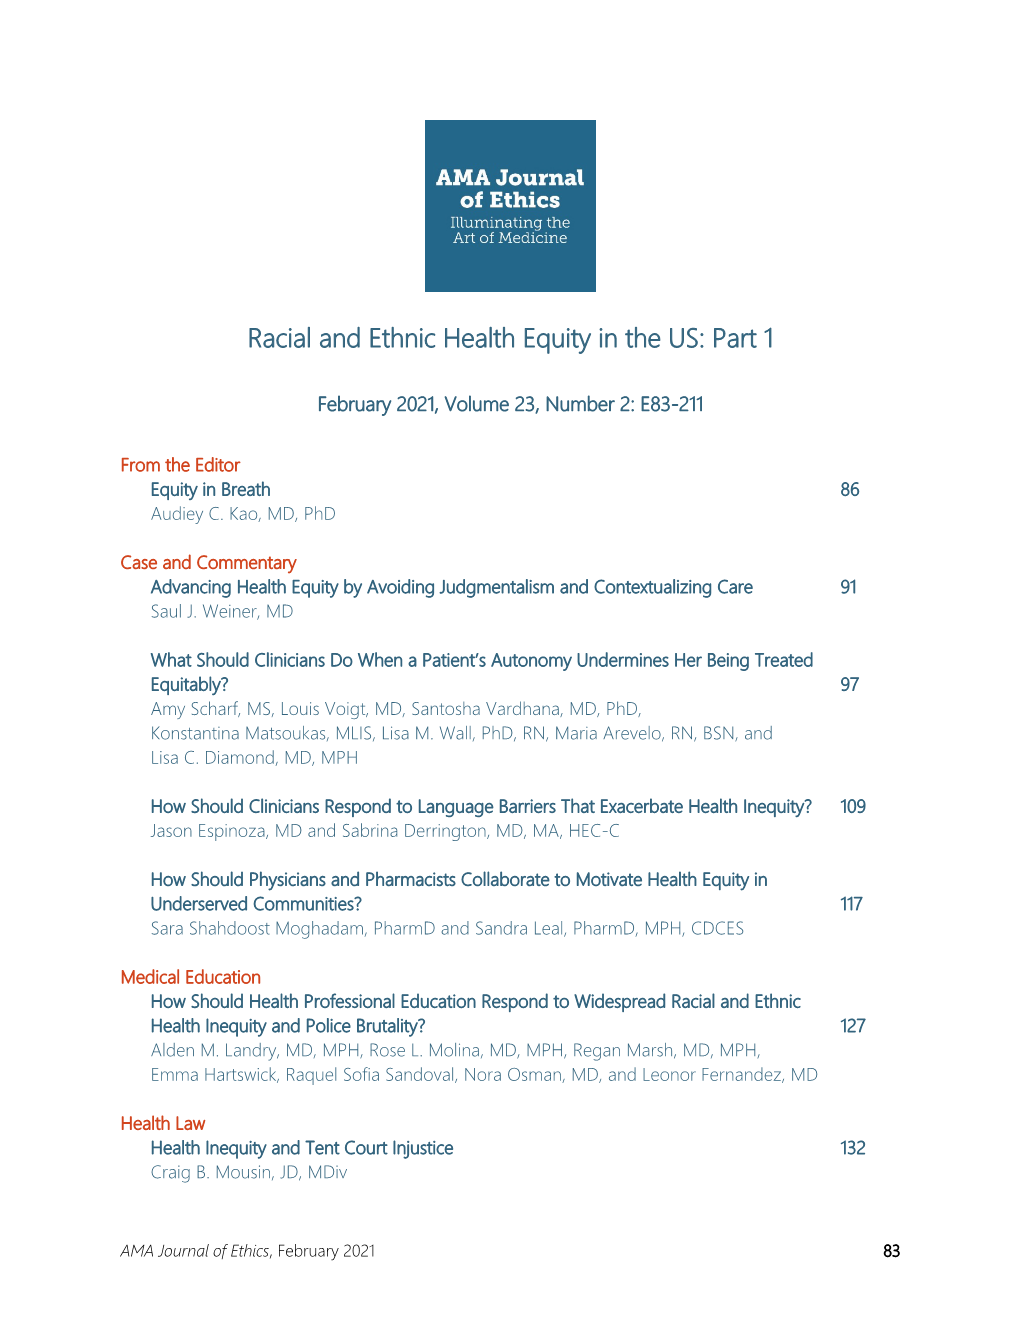 Racial and Ethnic Health Equity in the US: Part 1